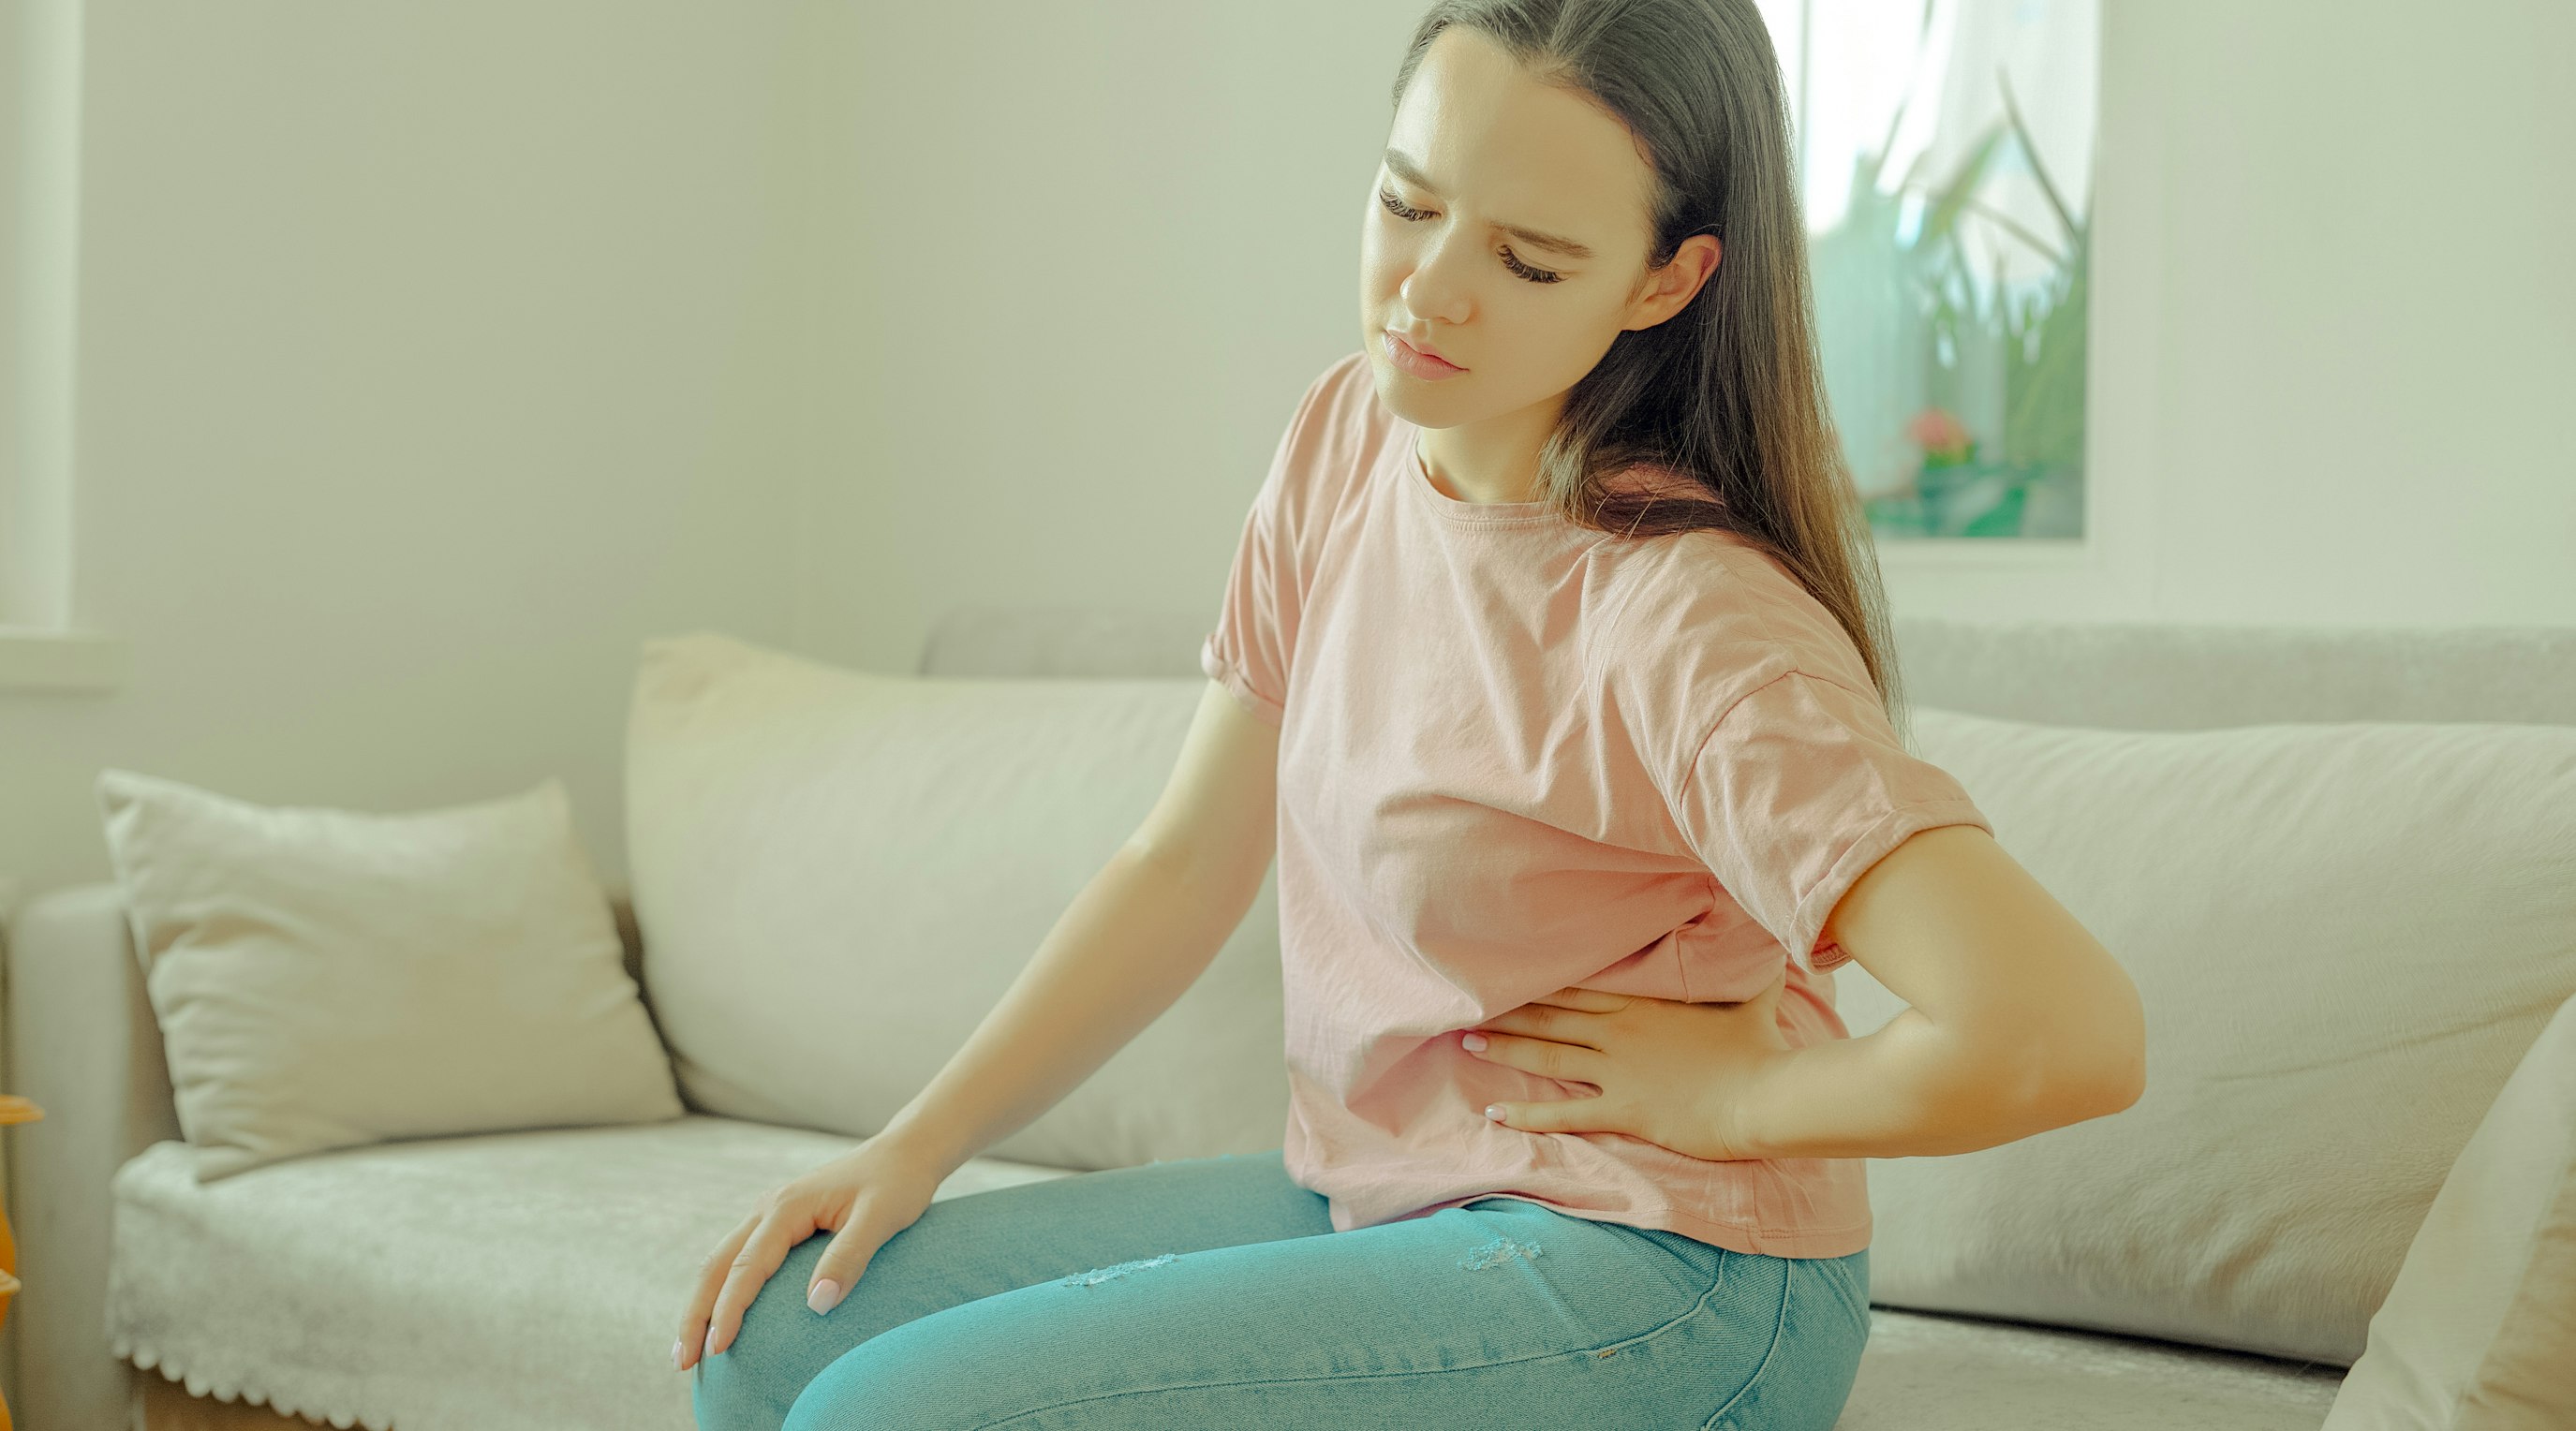 Can CBD potentially reduce scoliosis pain?